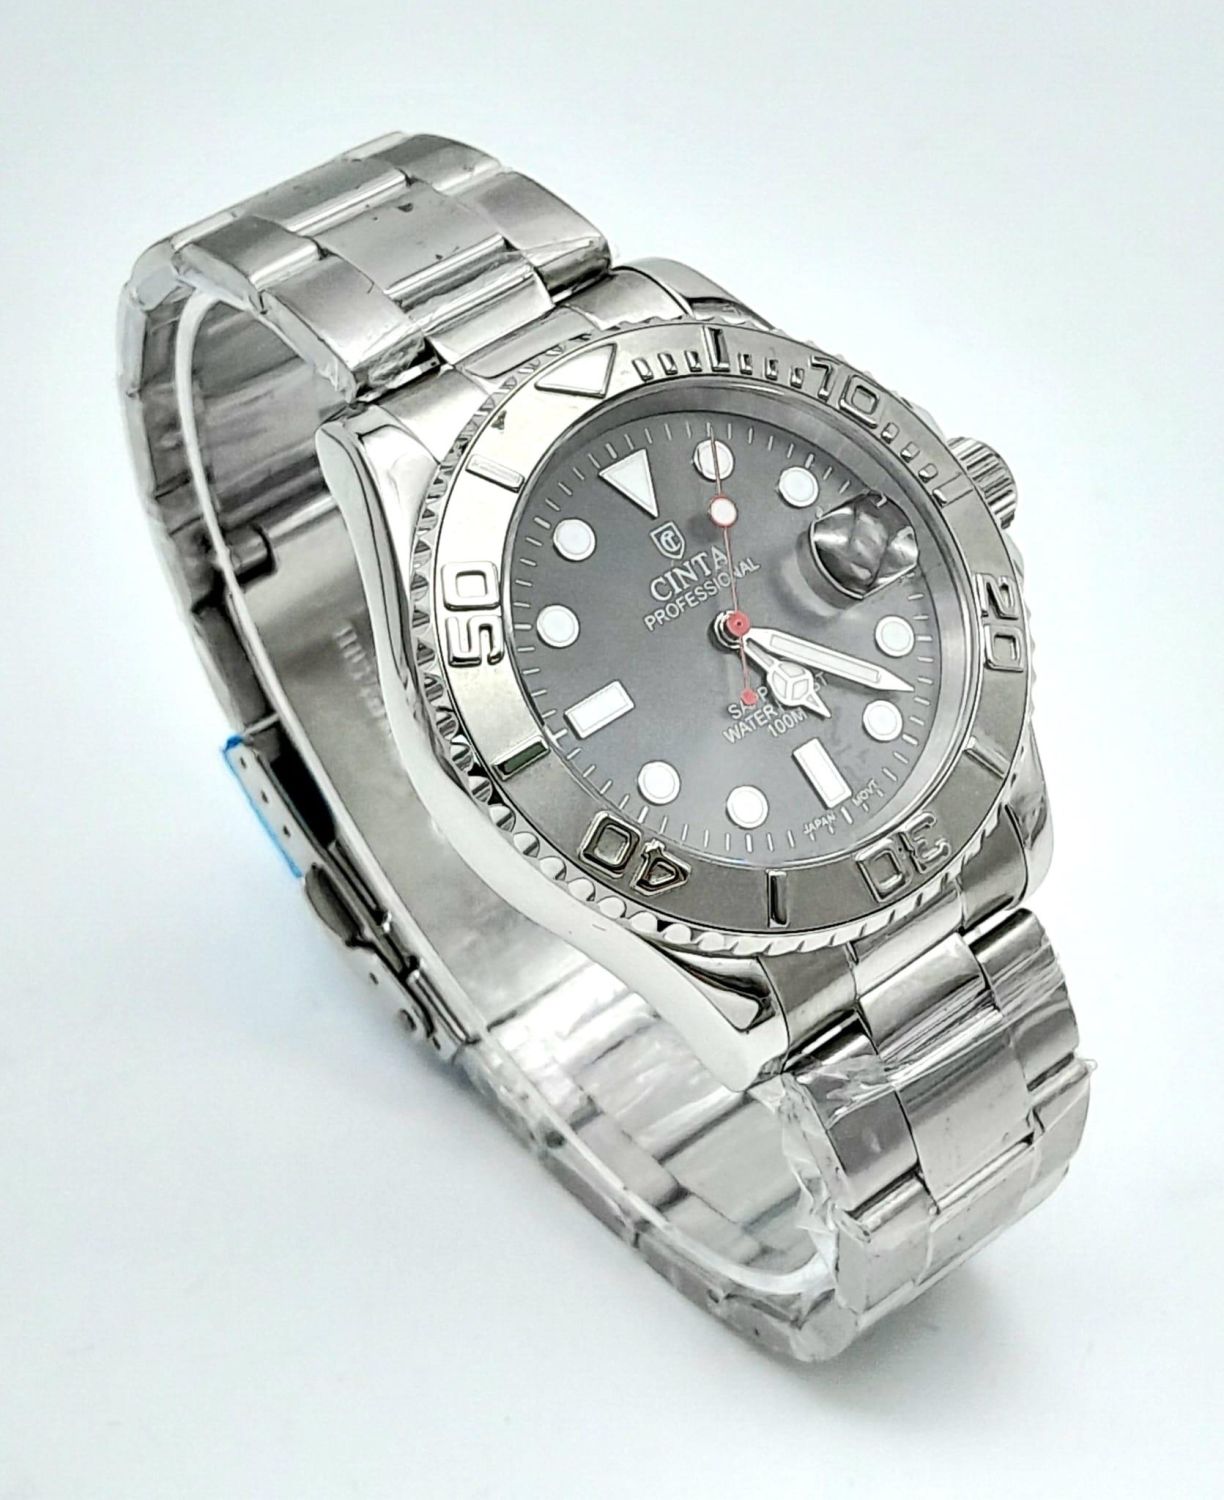 A stainless steel CINTA - PROFESSIONAL Diver's style watch, case 41 mm, calibrated bezel, grey - Image 7 of 14